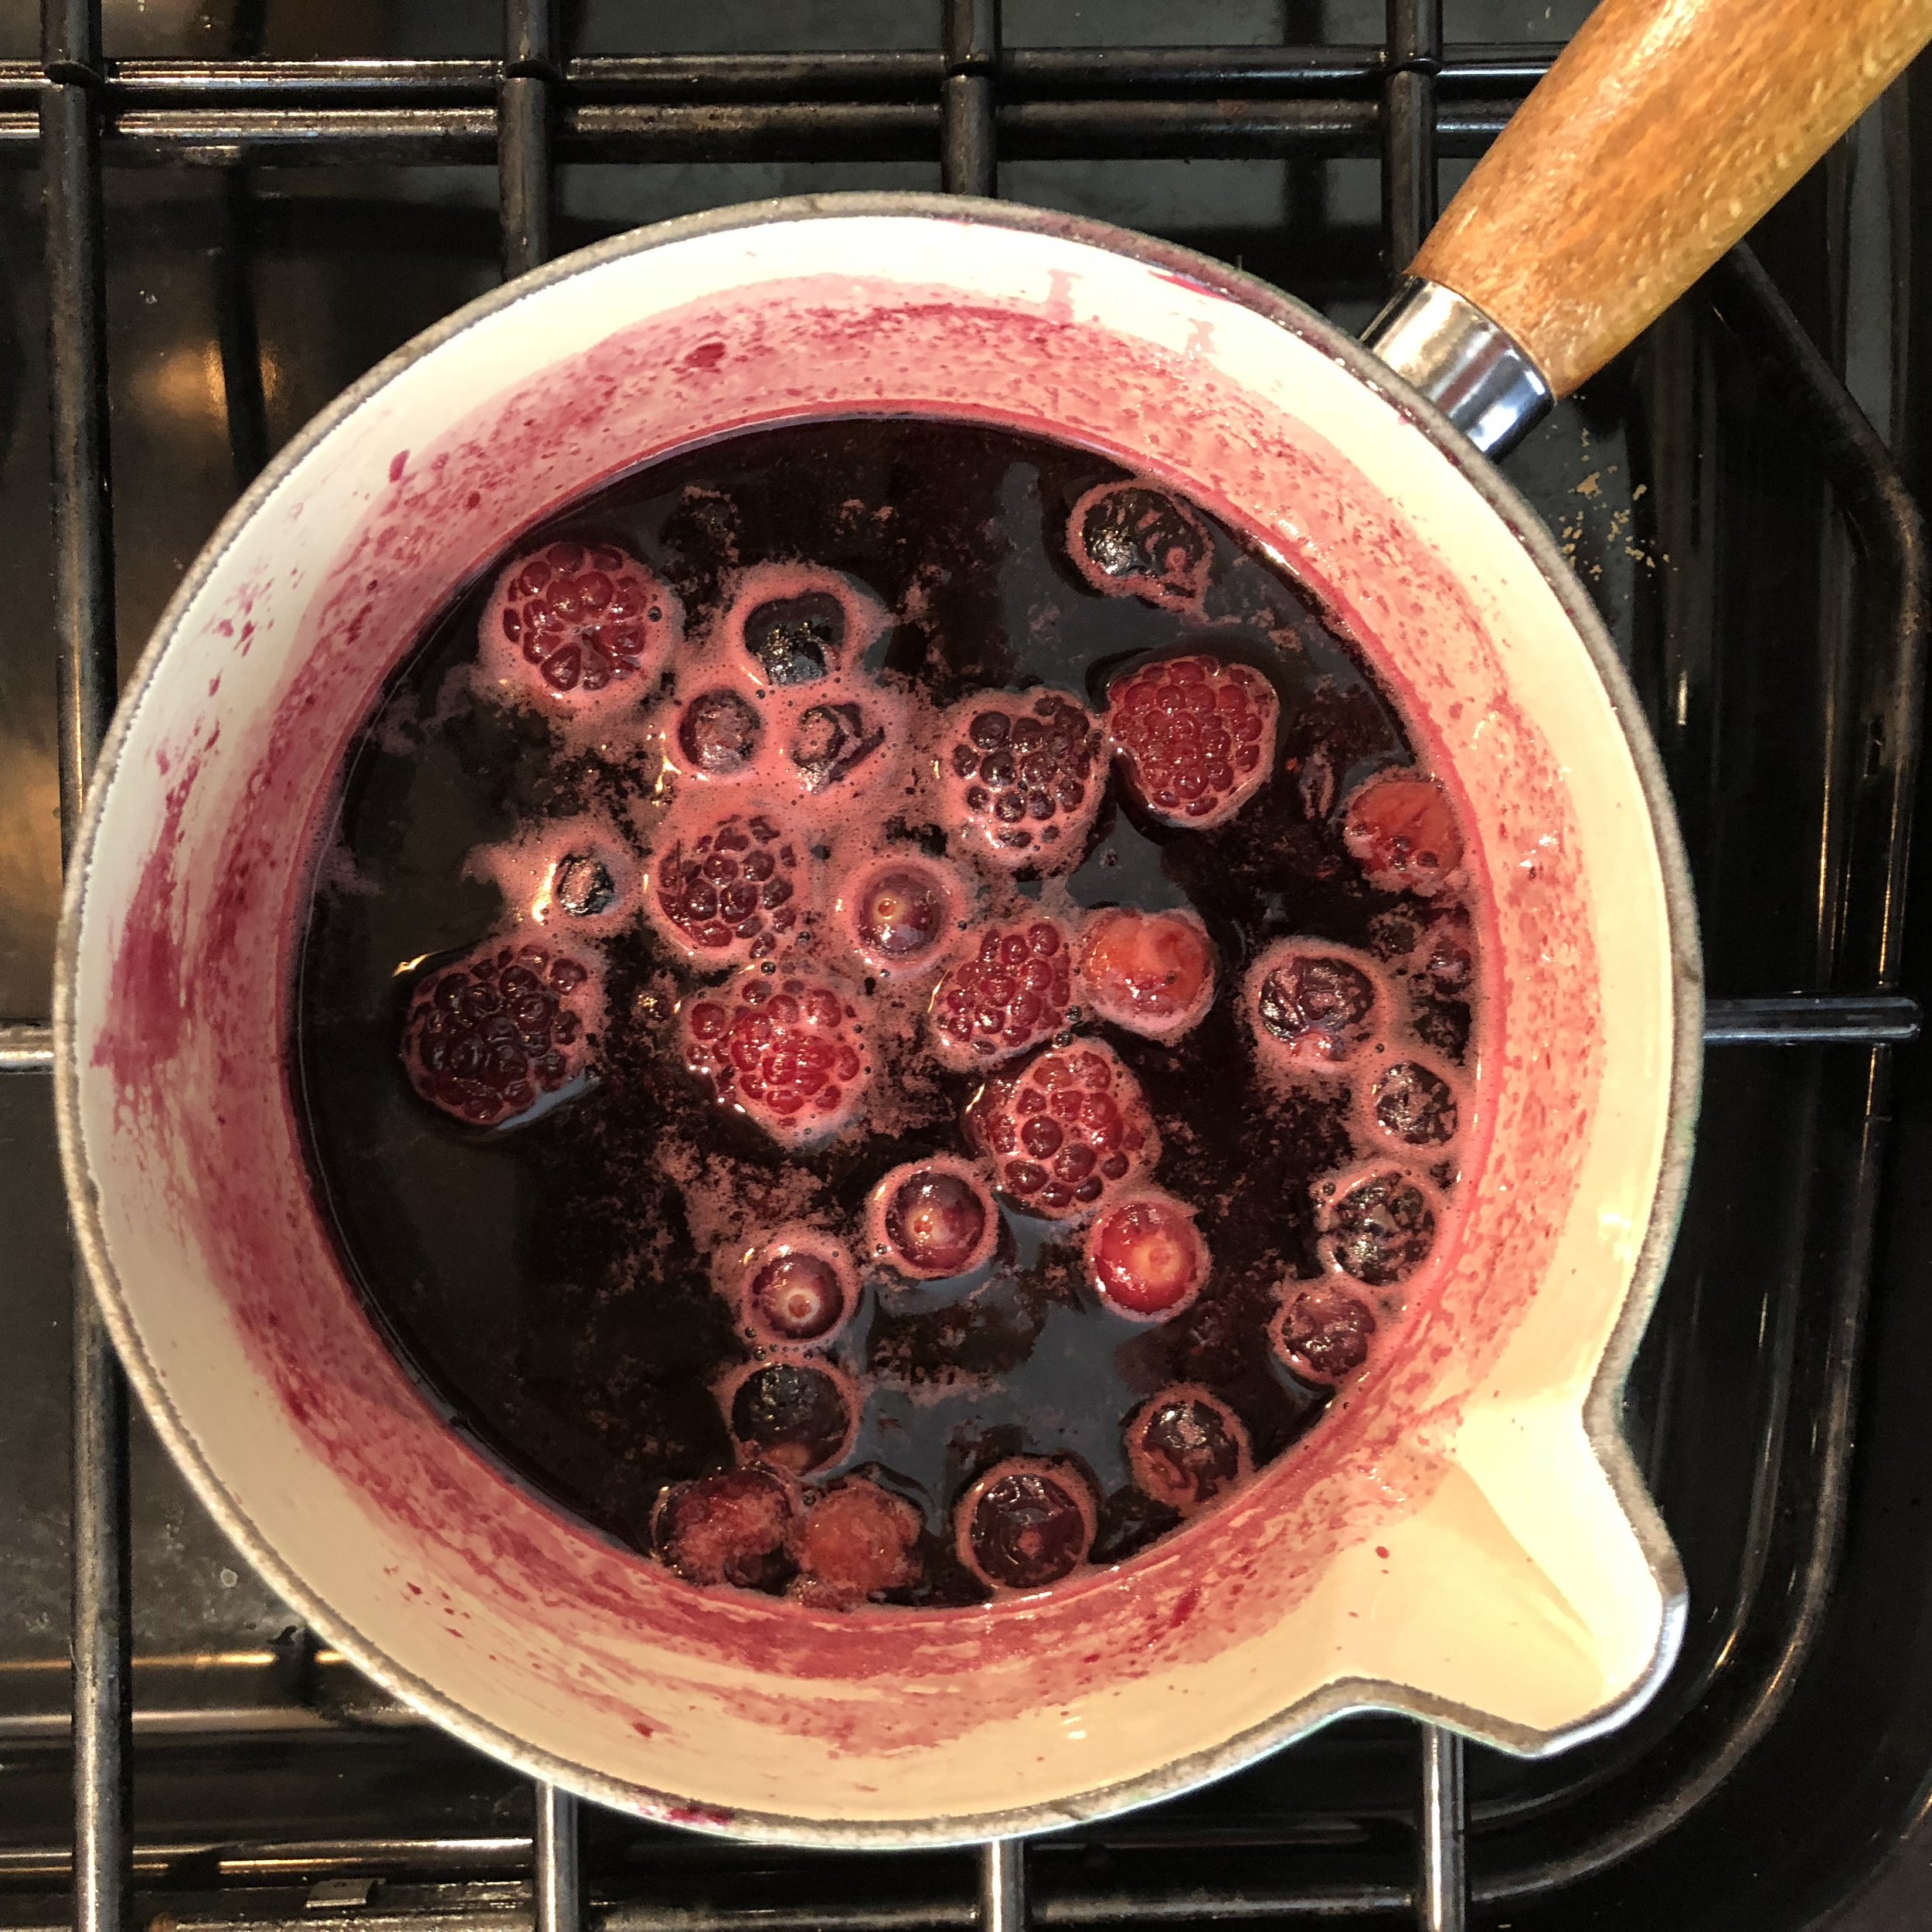 Simmer the jam and fruit